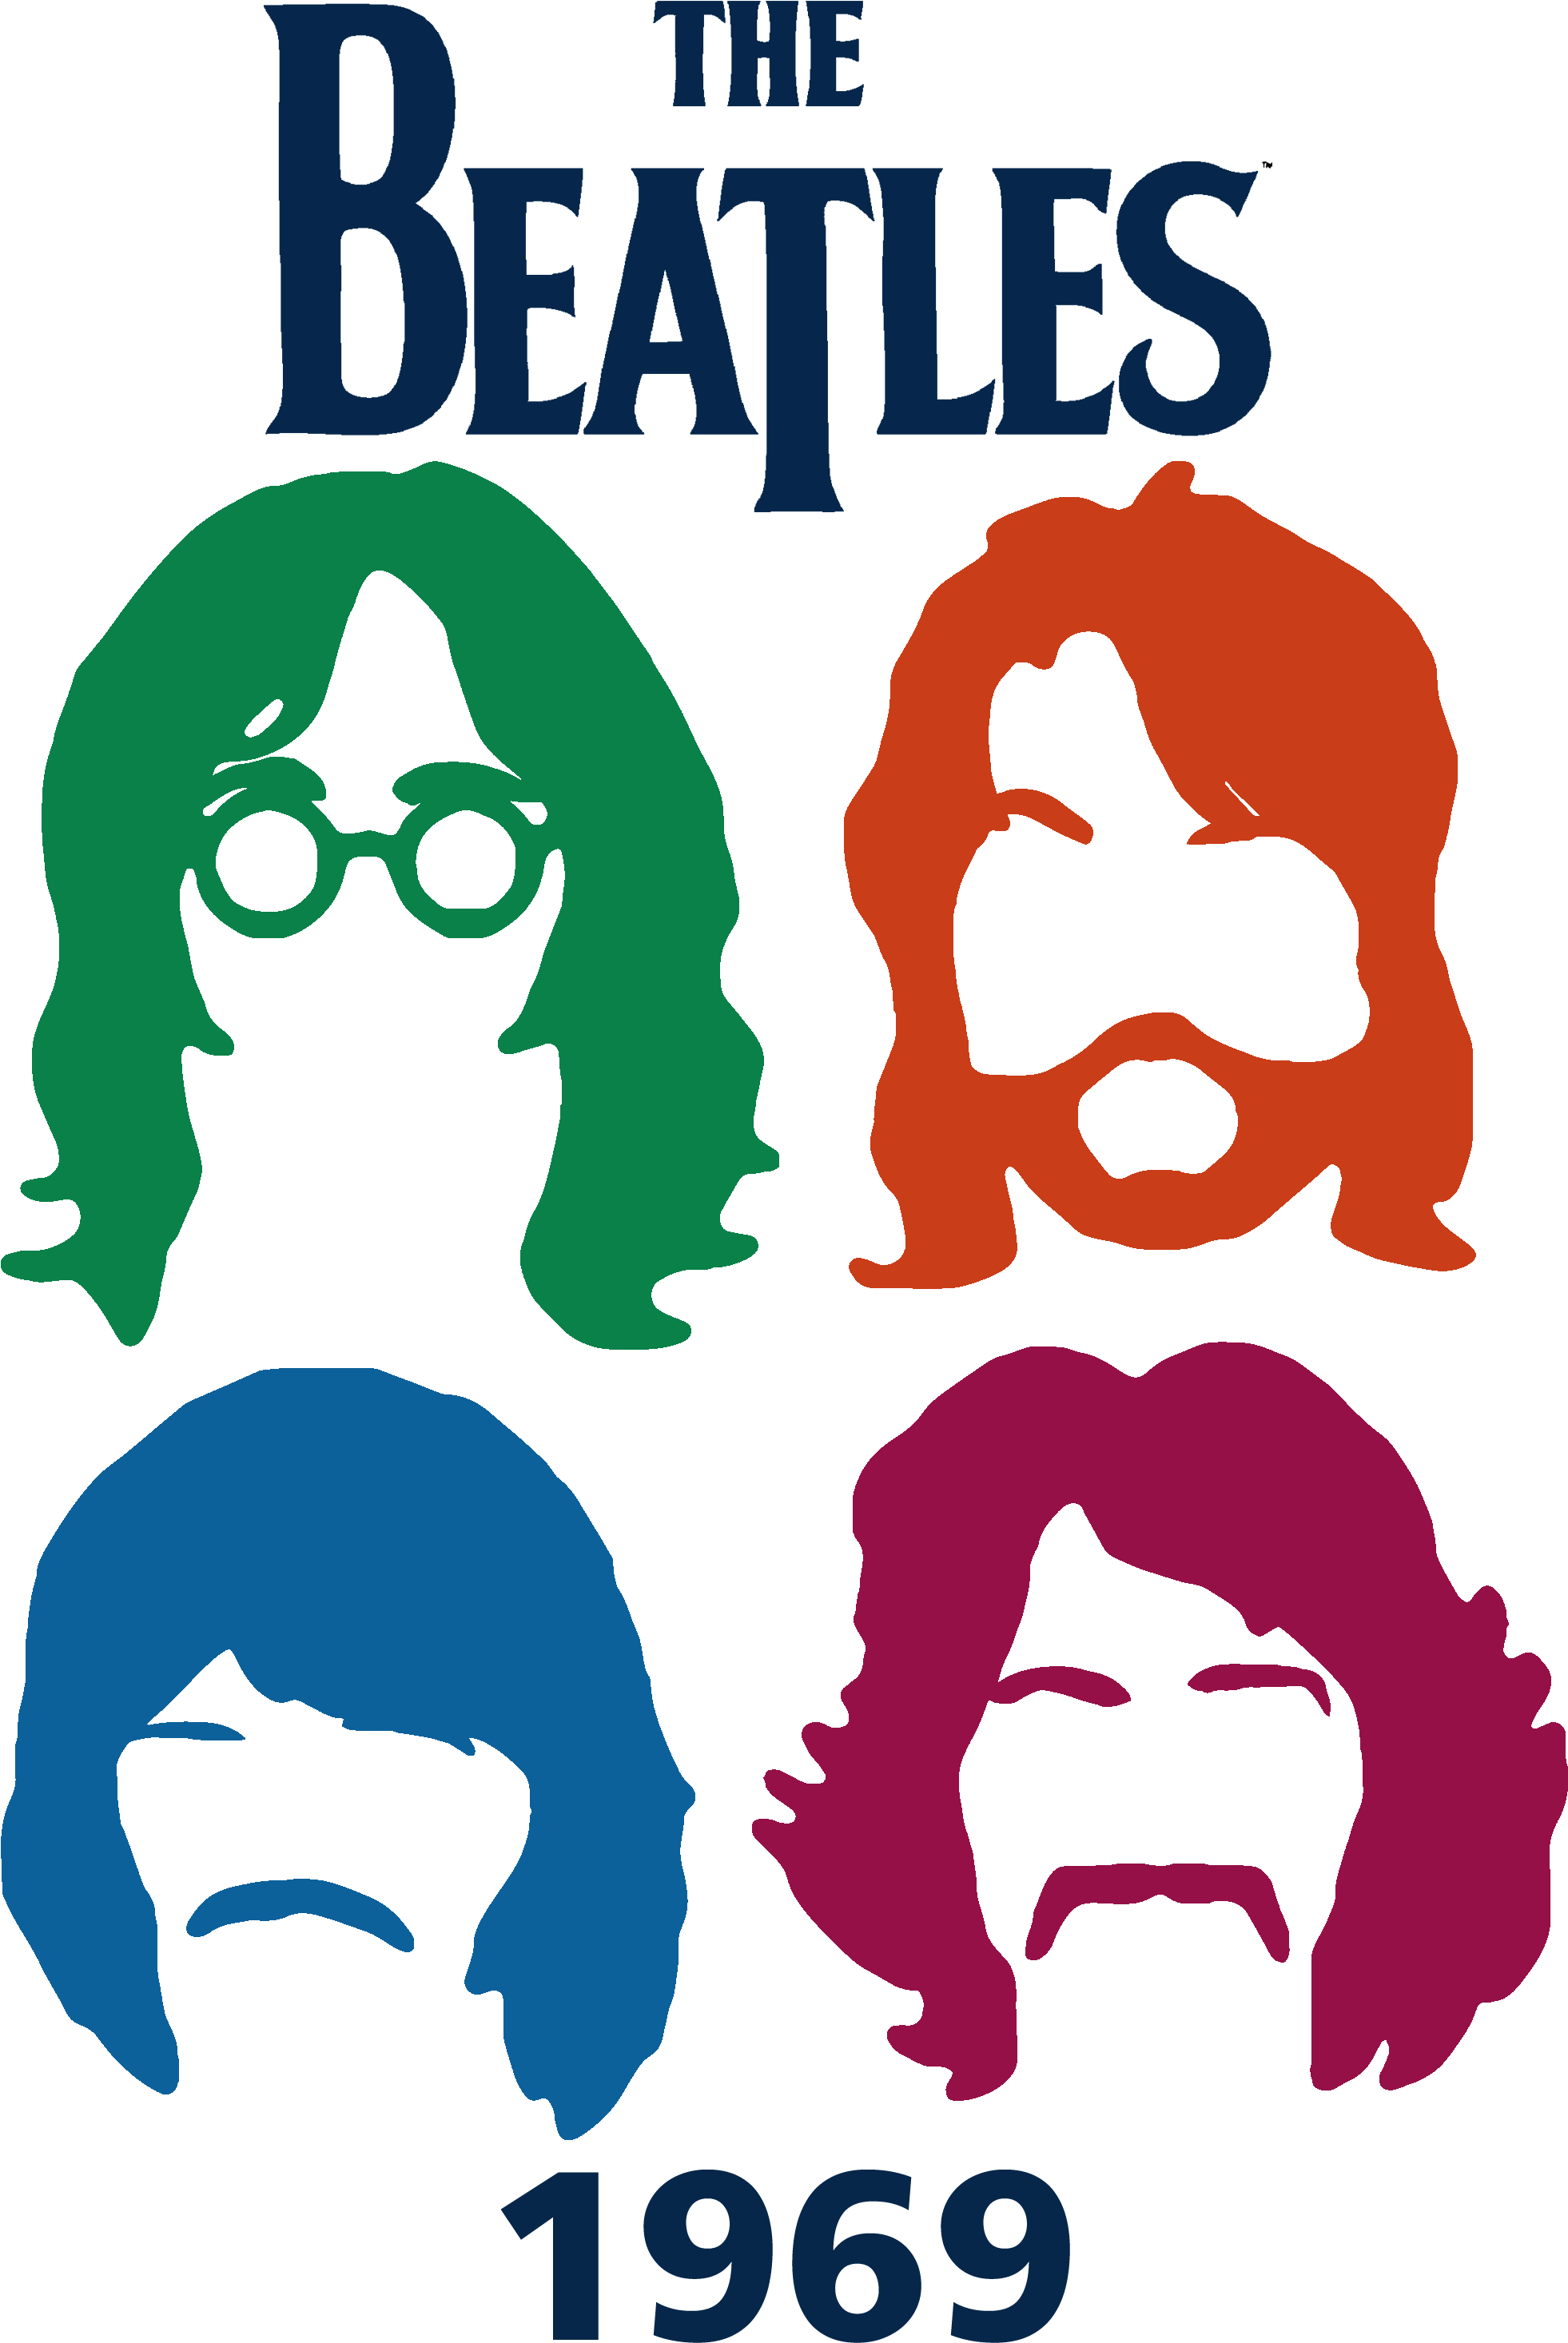 The Beatles - The Beatles (2016x3096)